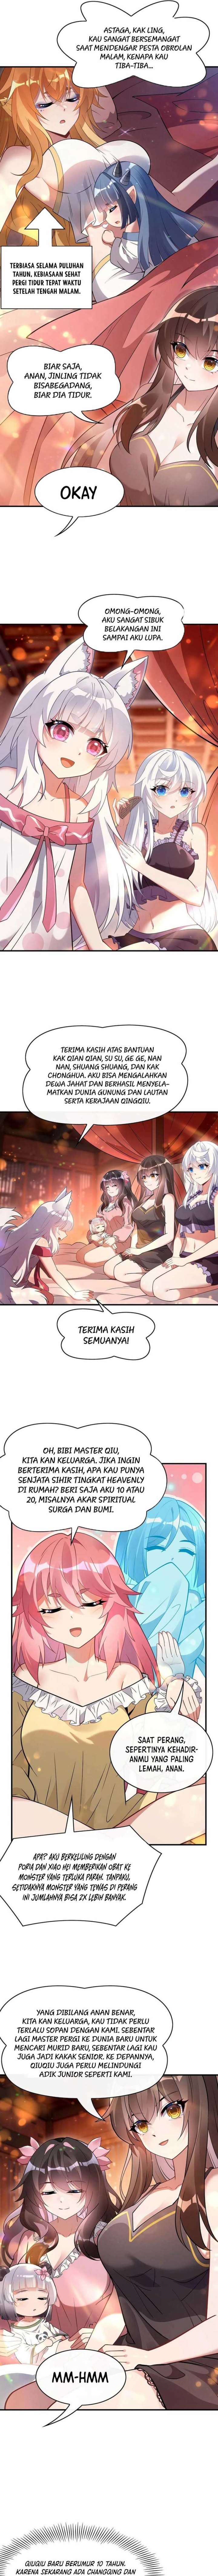 Dilarang COPAS - situs resmi www.mangacanblog.com - Komik my female apprentices are all big shots from the future 253 - chapter 253 254 Indonesia my female apprentices are all big shots from the future 253 - chapter 253 Terbaru 2|Baca Manga Komik Indonesia|Mangacan